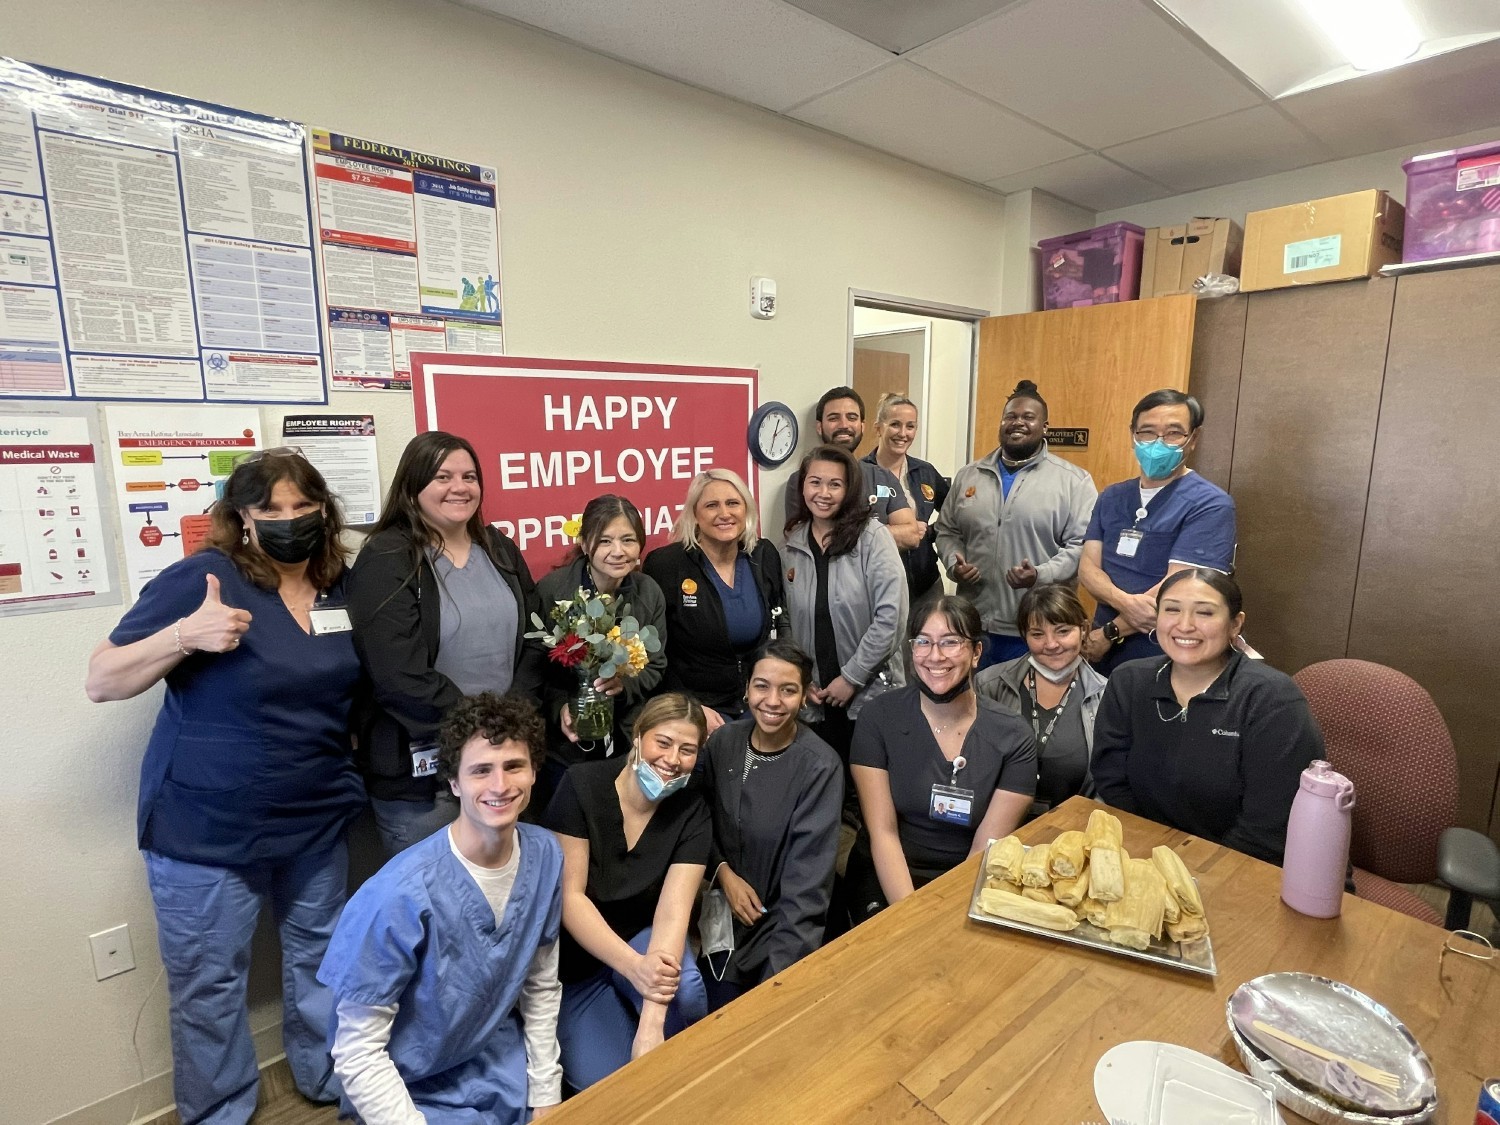 Celebrating our amazing team of dedicated and hardworking employees during Employee Appreciation Week!